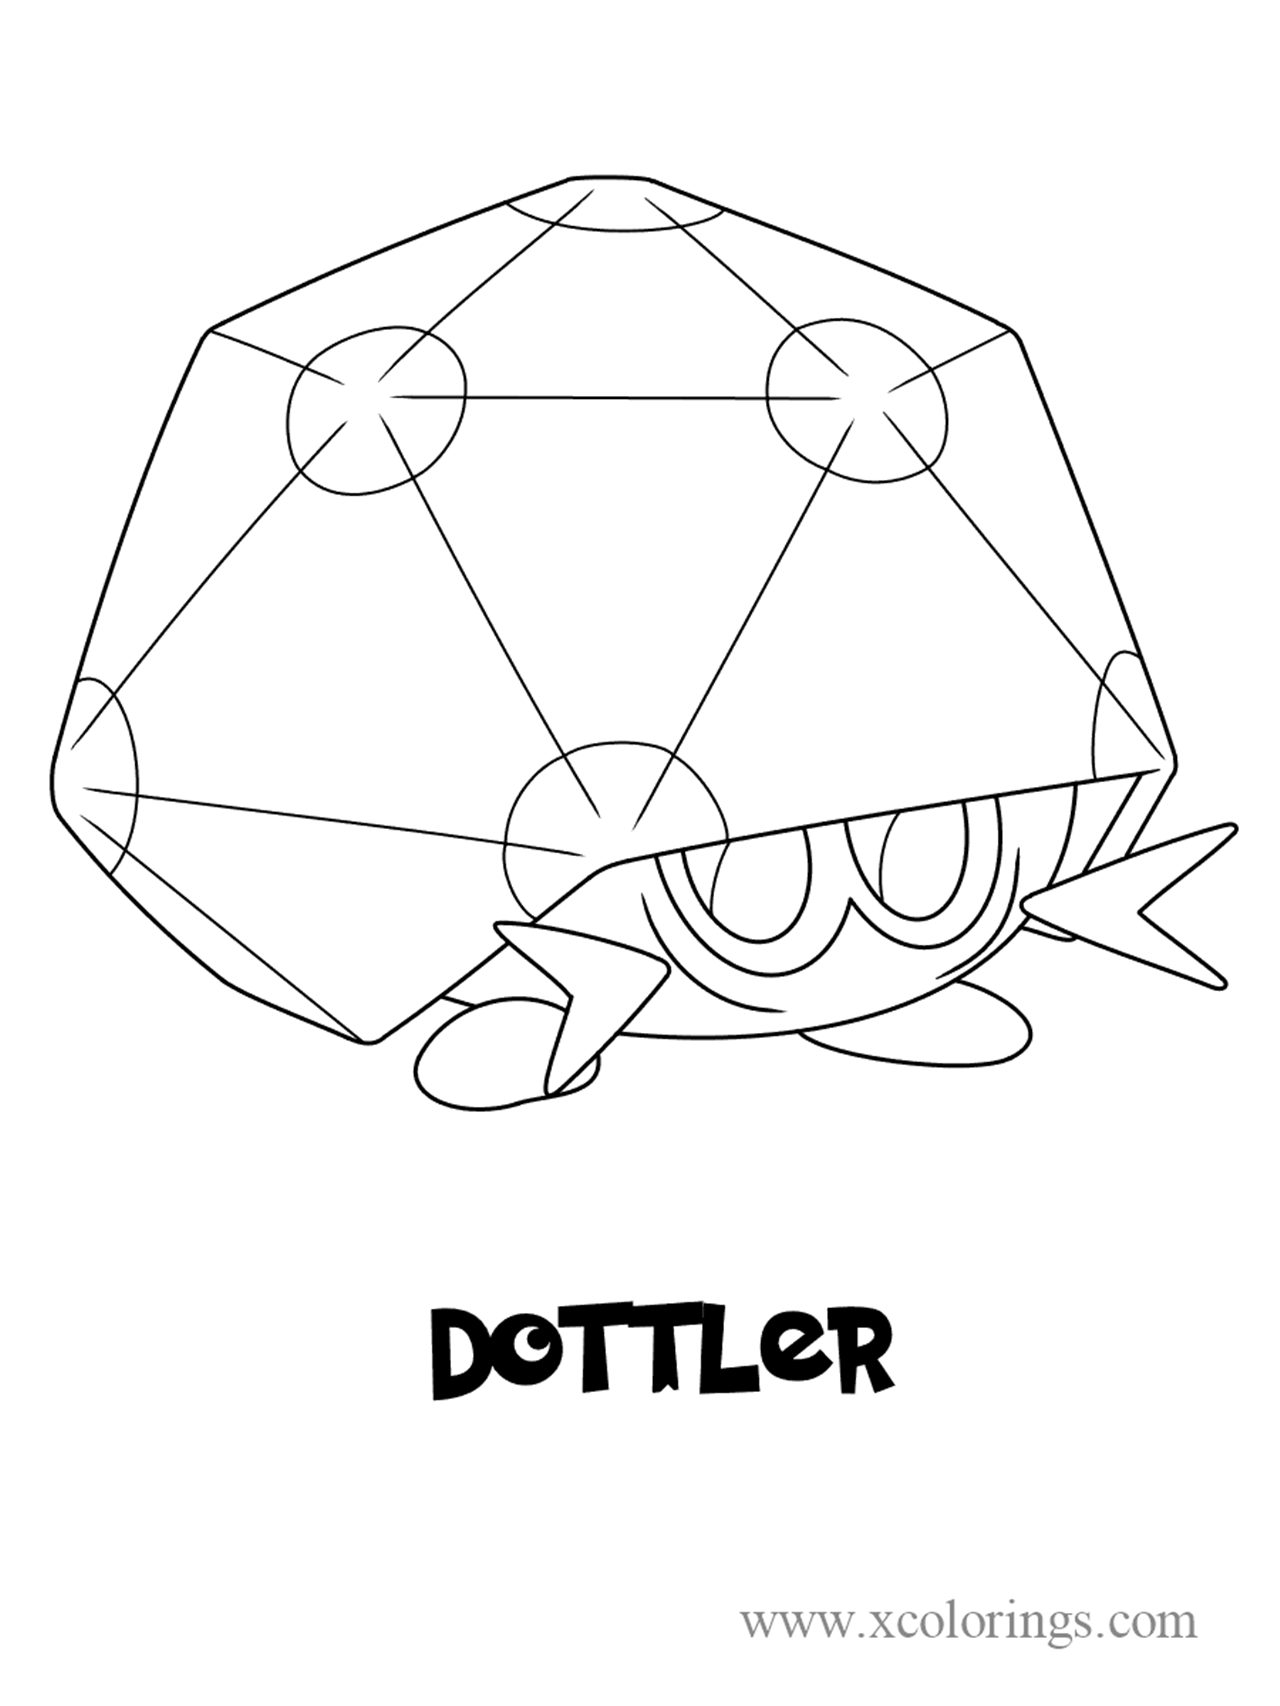 Free Pokemon sword and shield Dottler Coloring Pages printable